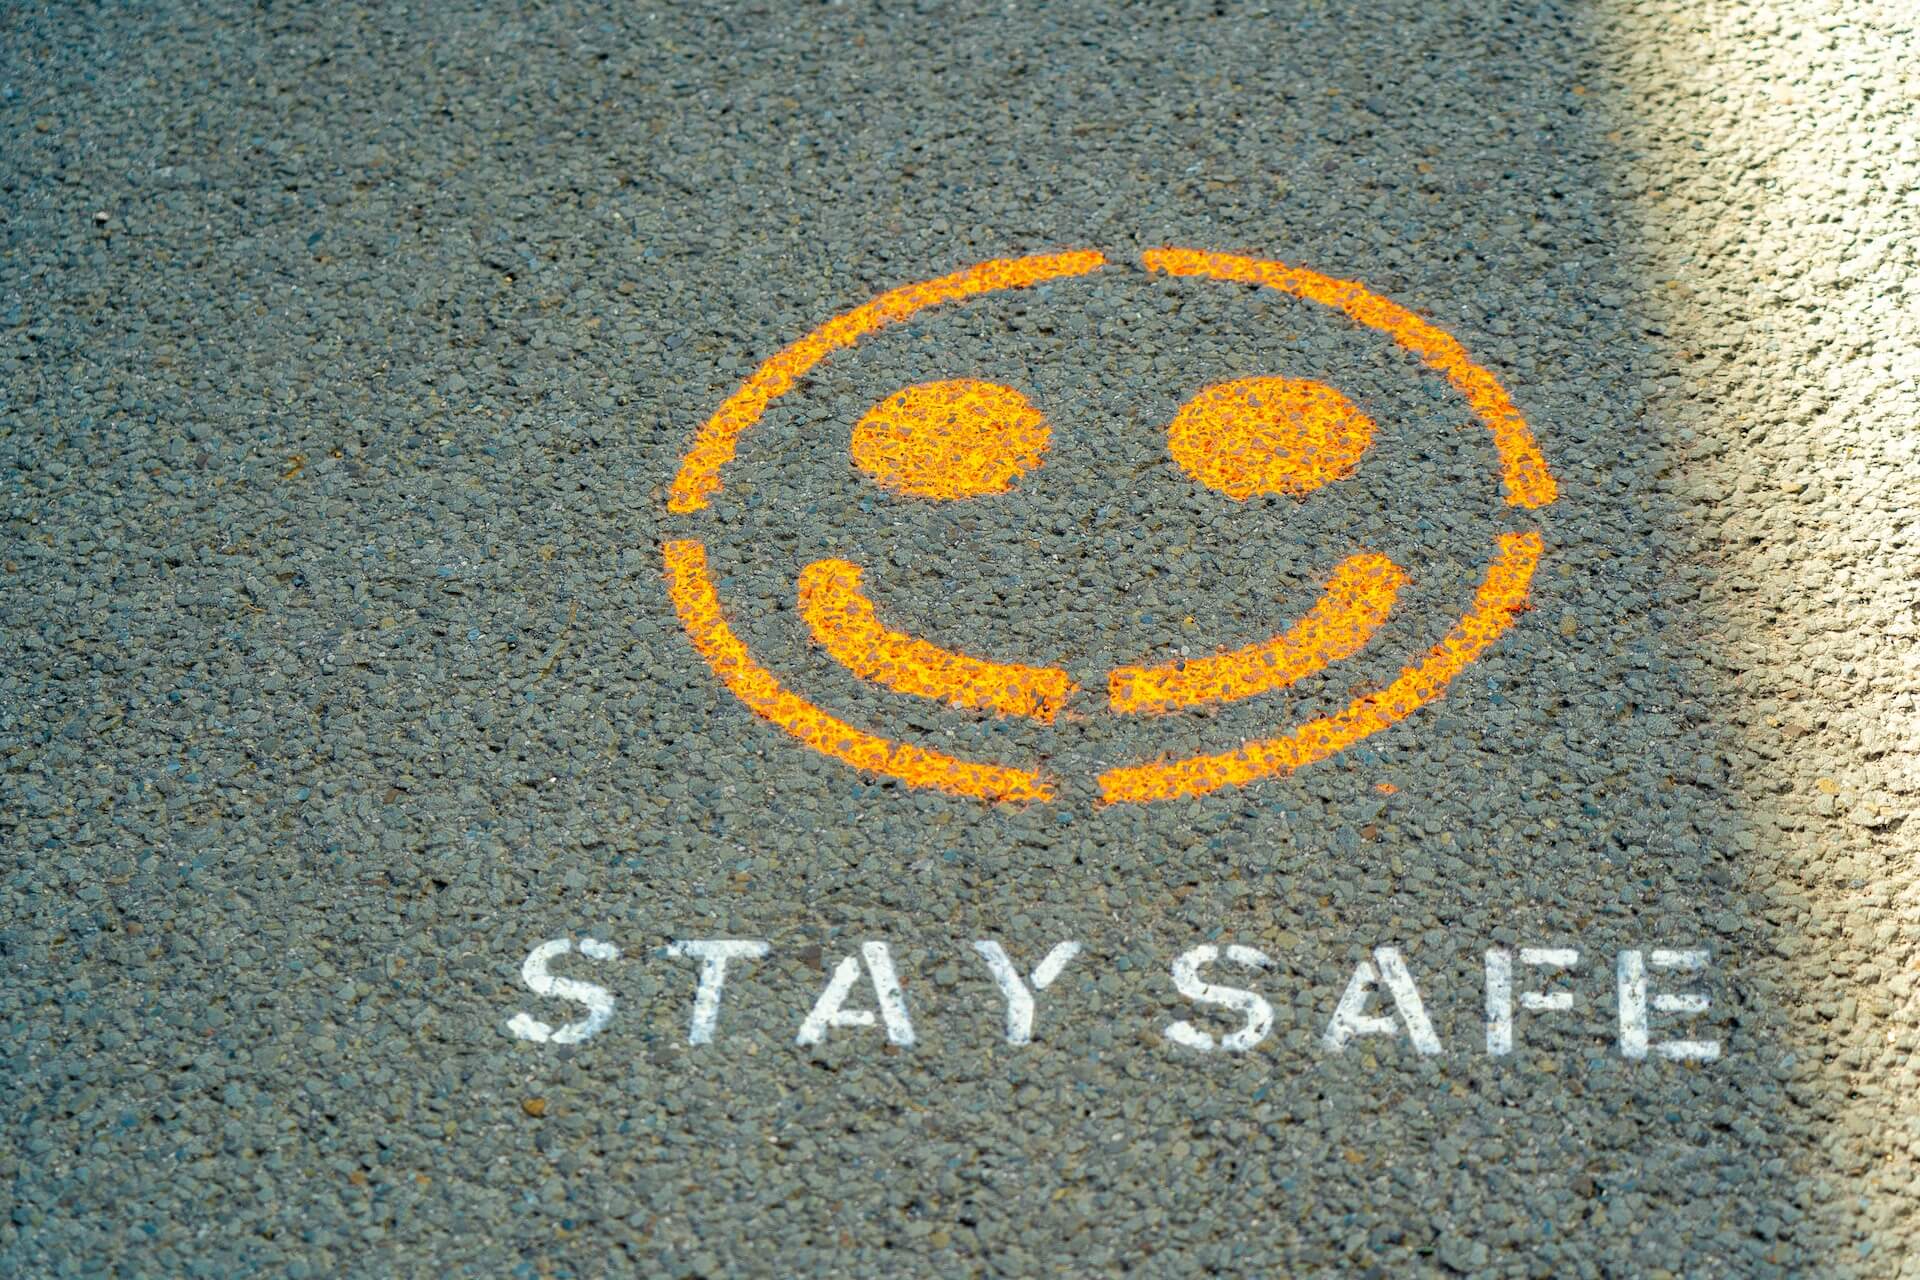 A 'stay safe' sign on the road